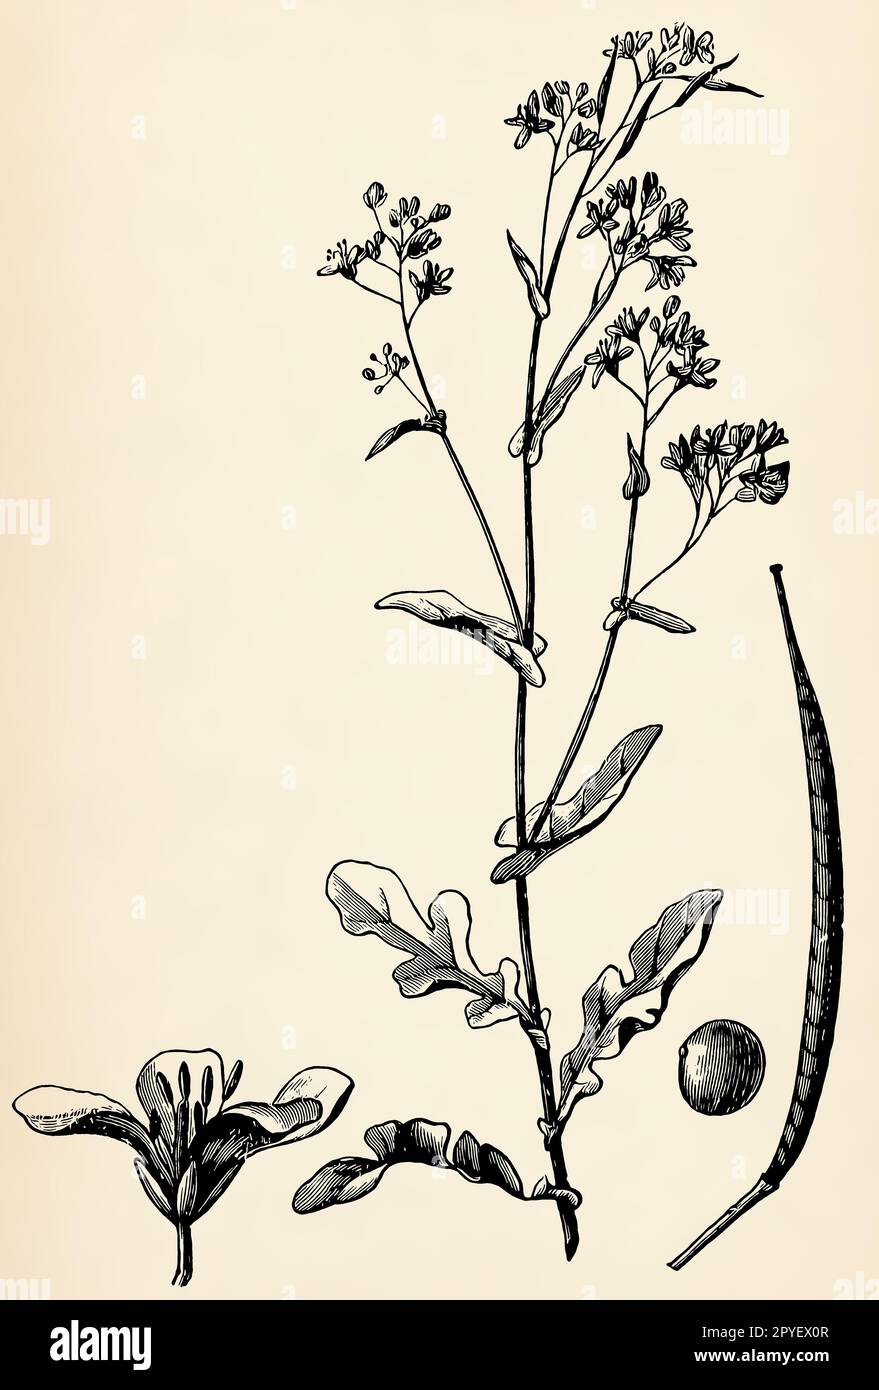 Stem, flowers and fruits of Brassica rapa. Antique stylized illustration. Stock Photo